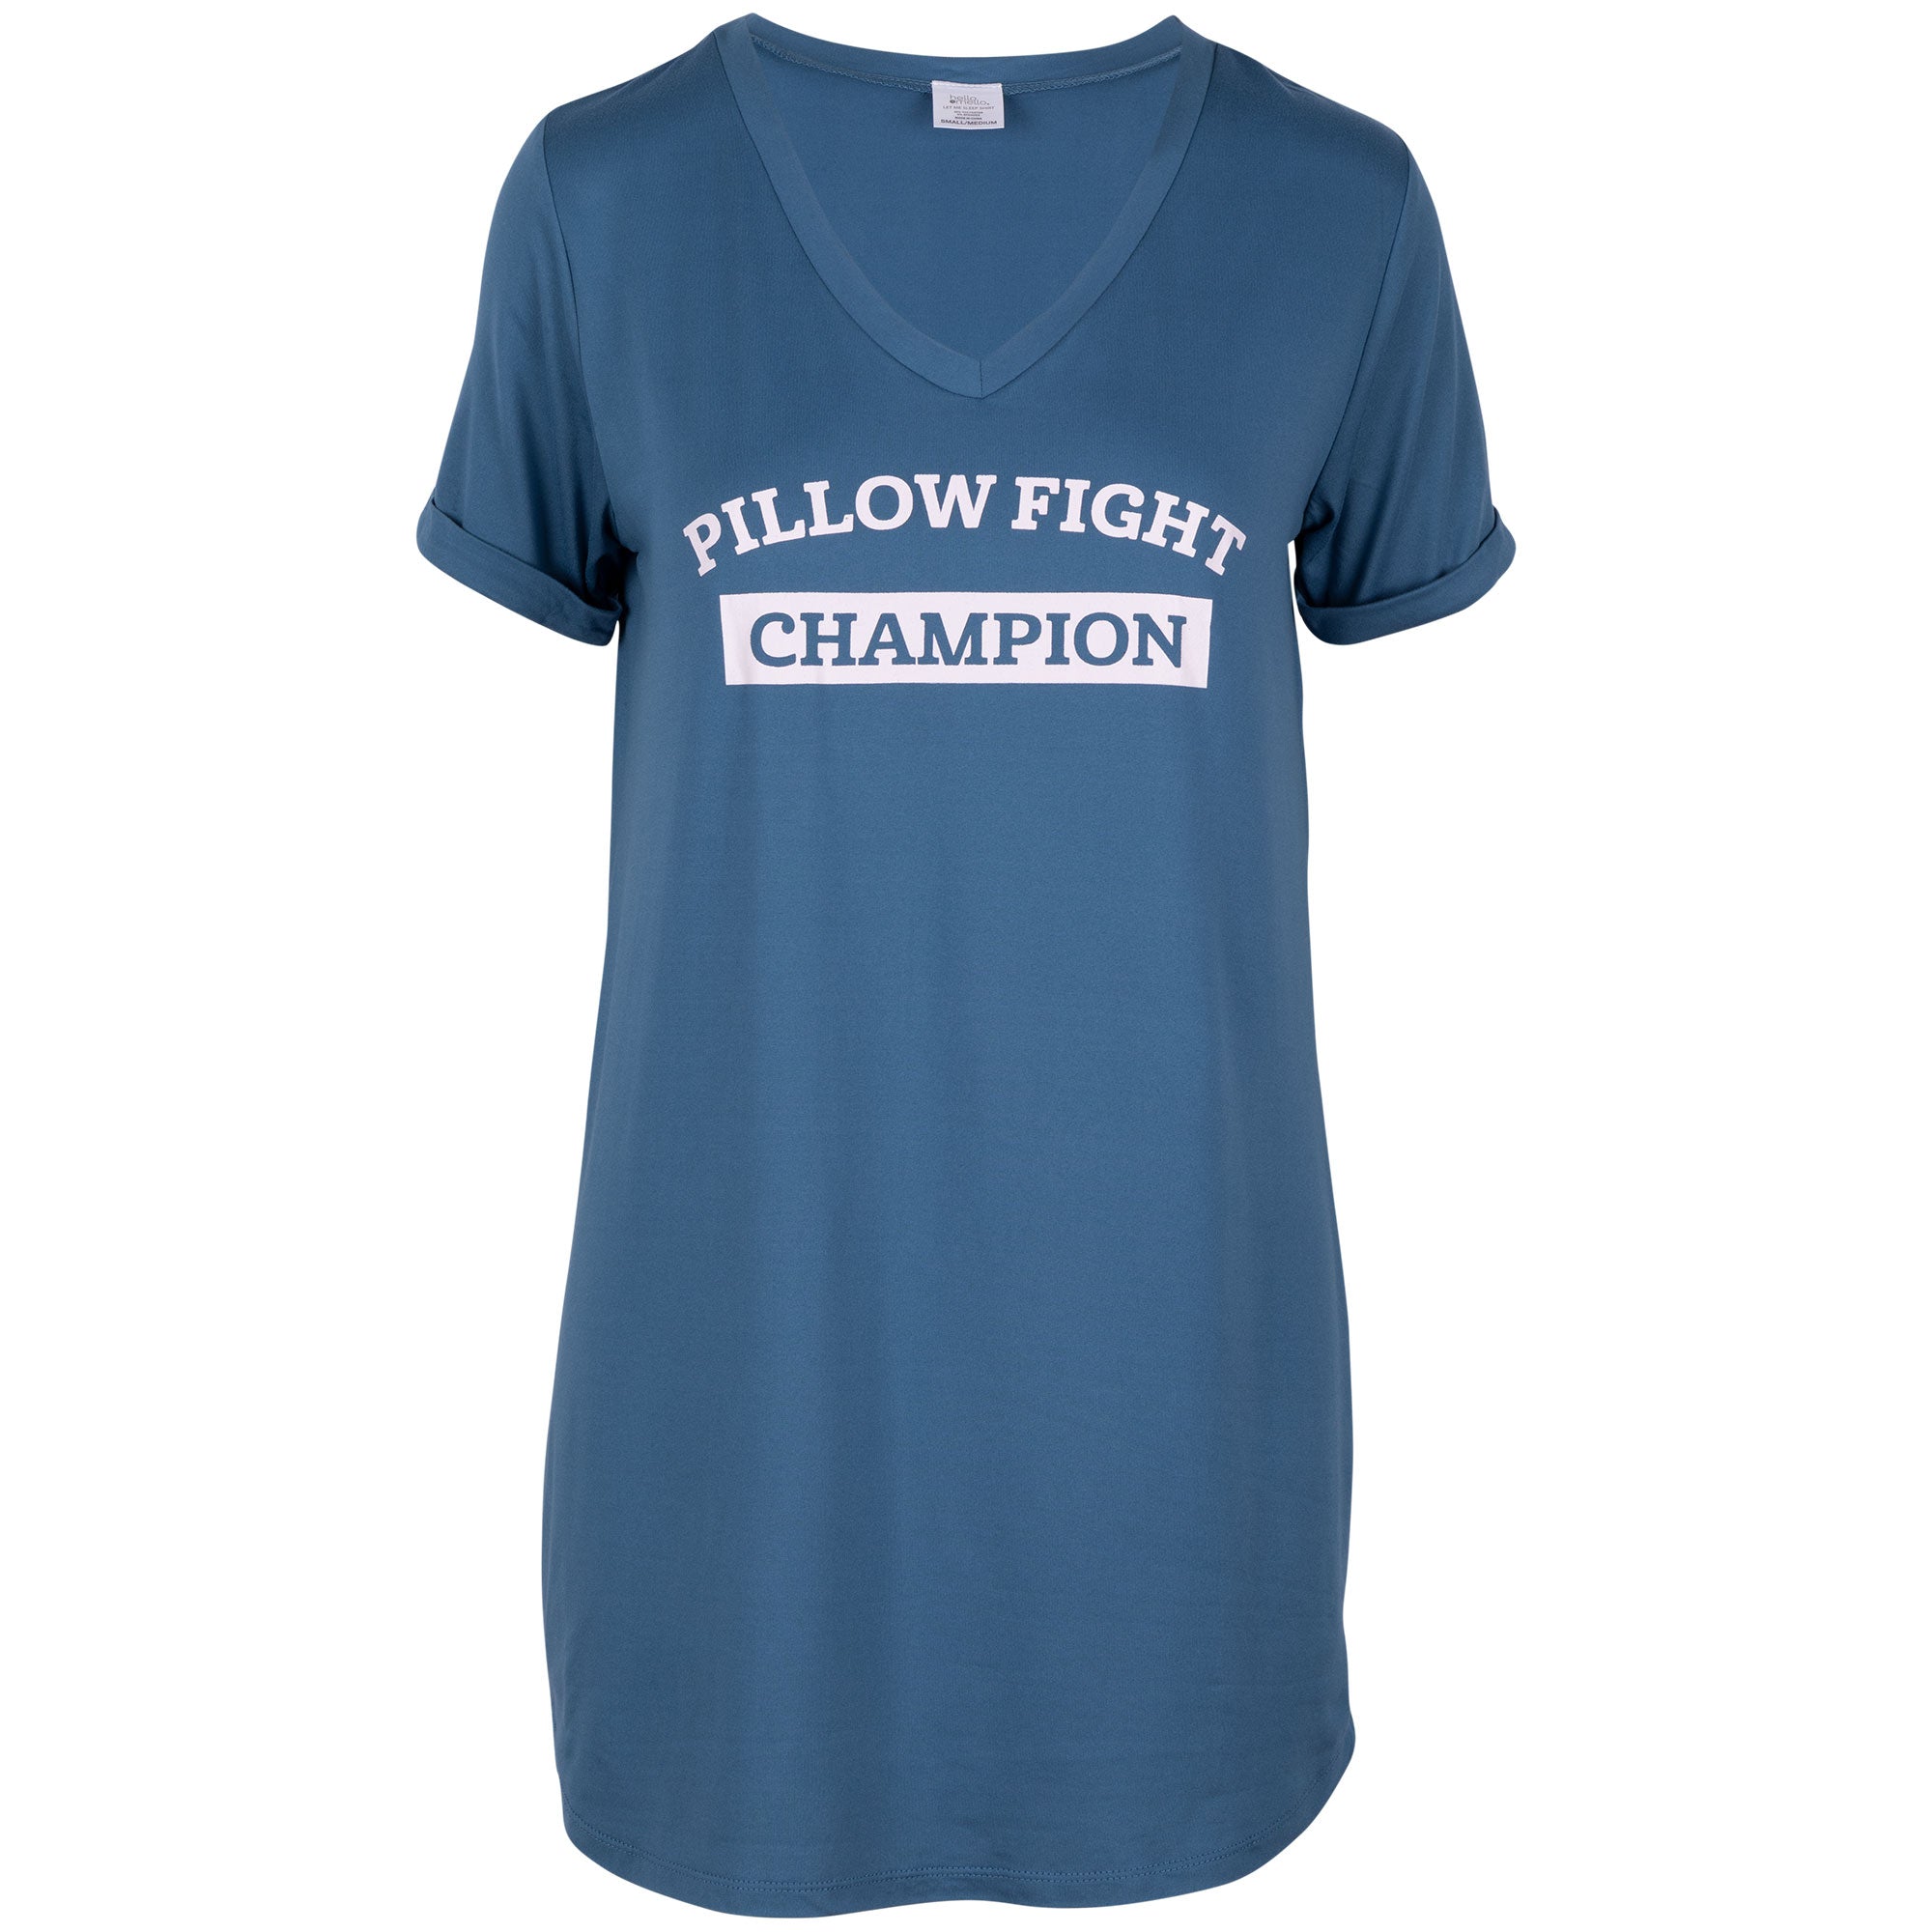 Say It Out Loud Nightgown - Pillow Fight Champion - S/M